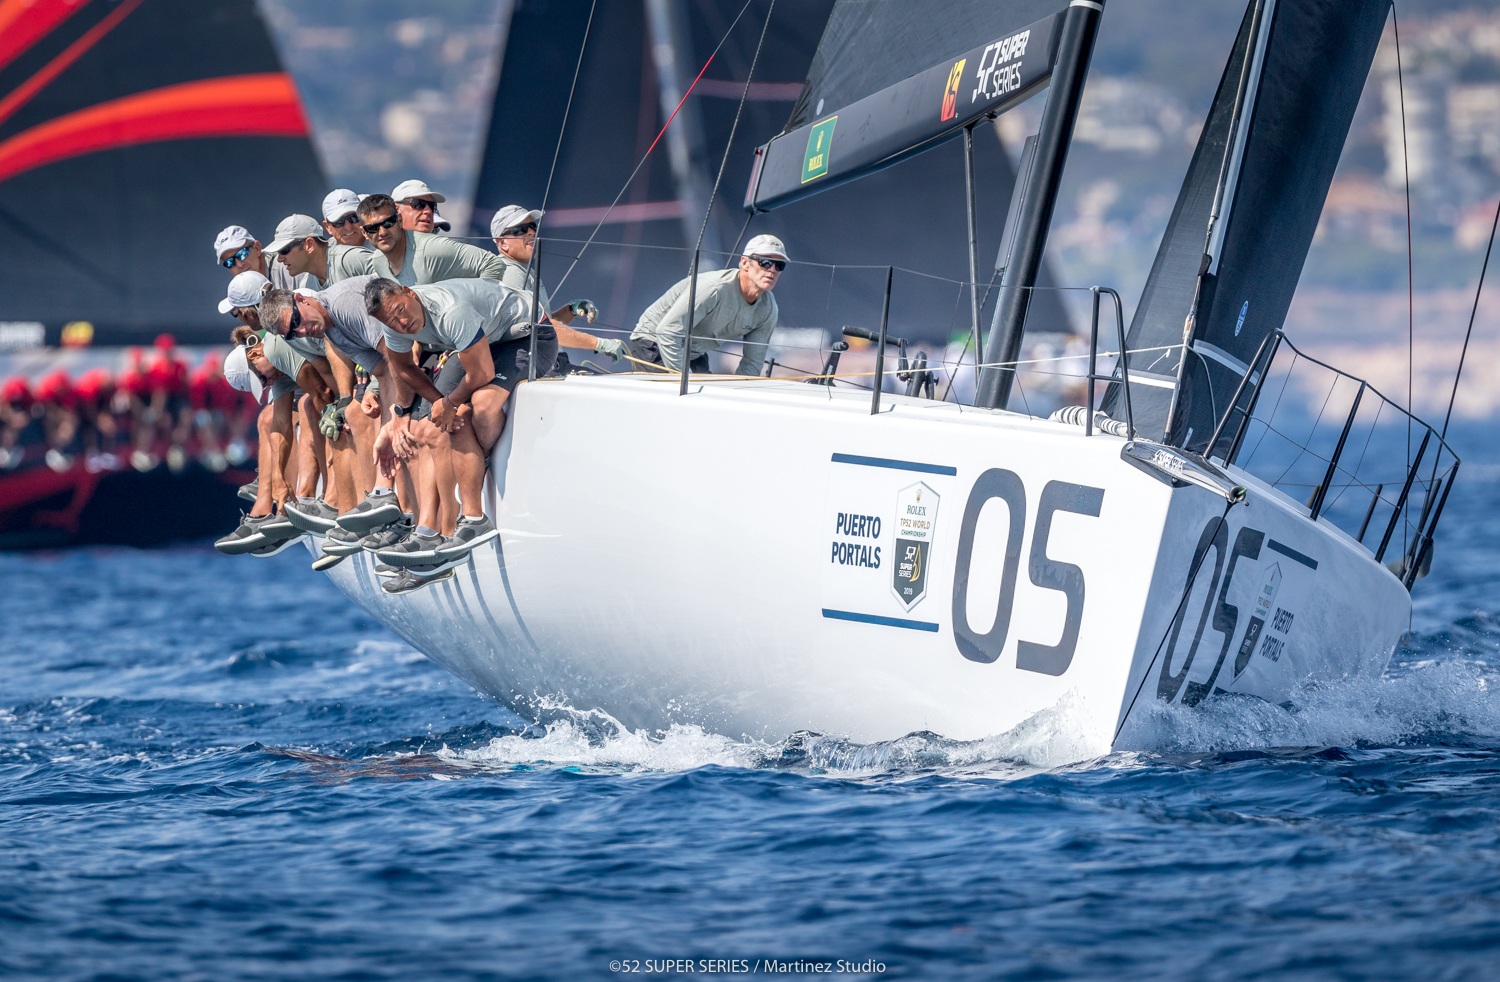  TP52  World Championship 2019  Puerto Portals ESP  Final results, Platoon of Harm MullerSpreer GER (with John Kostecki USA) takes title